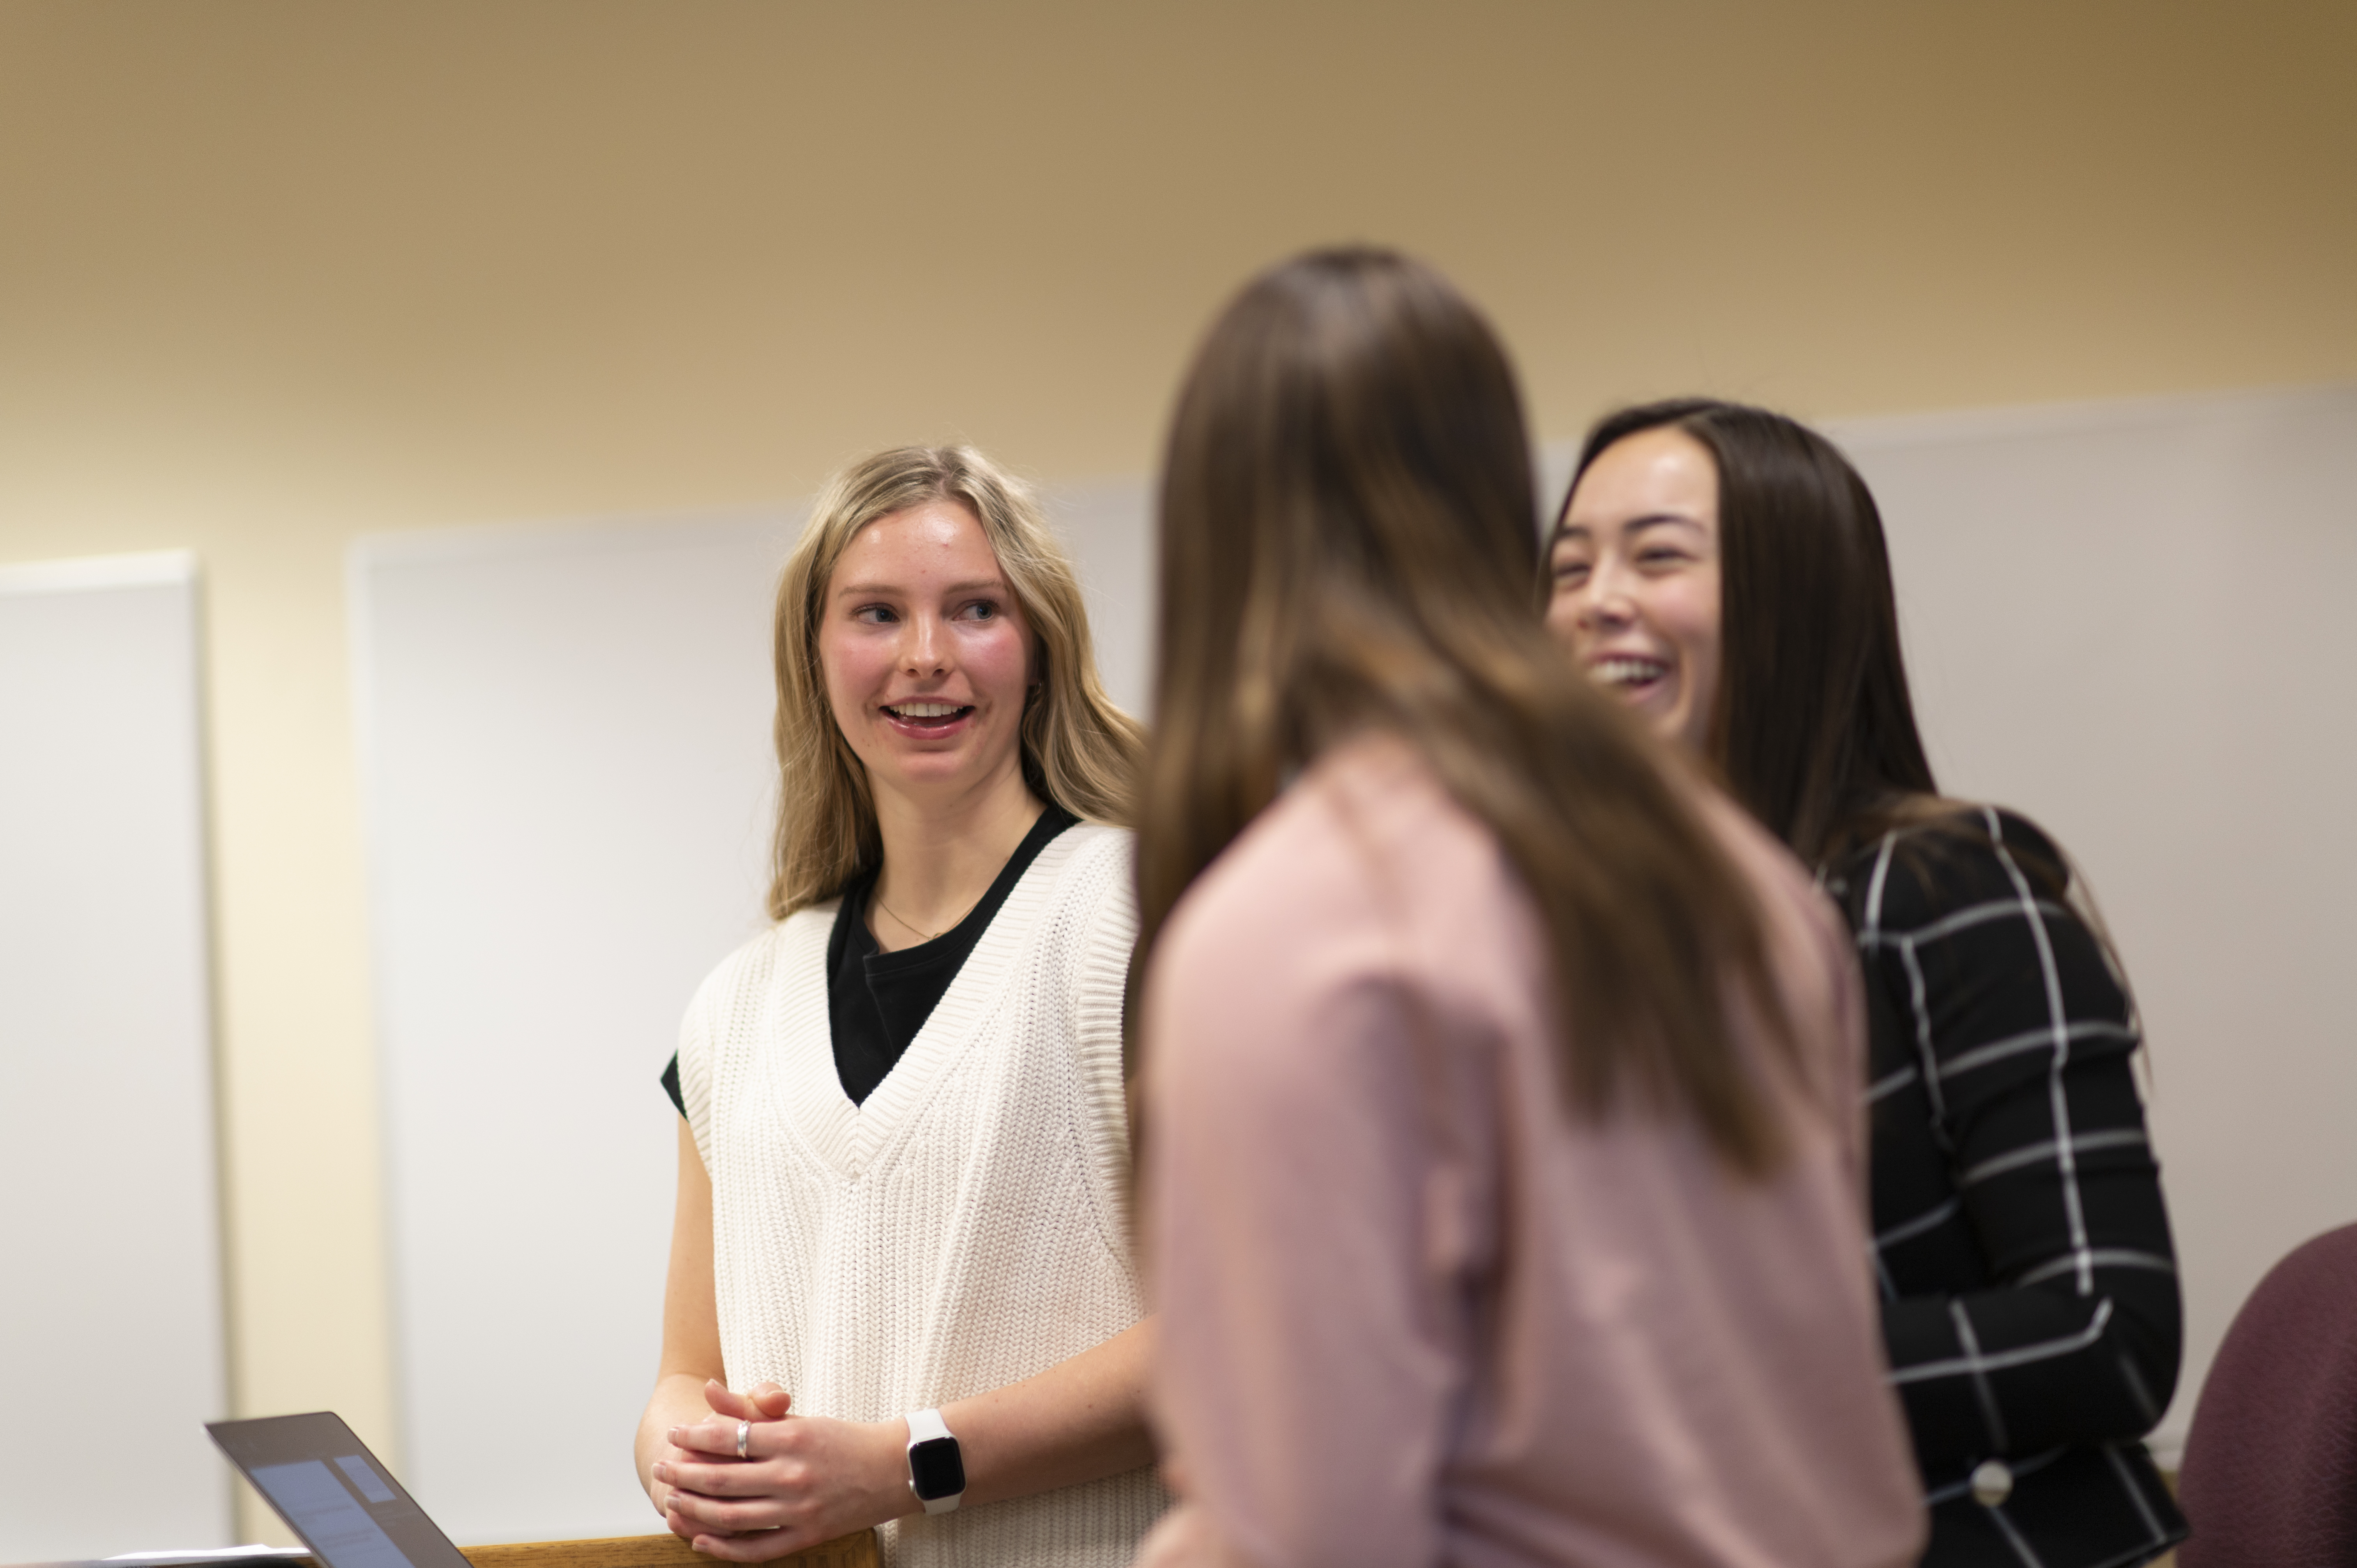 Three female students smile at each other while presenting to the class